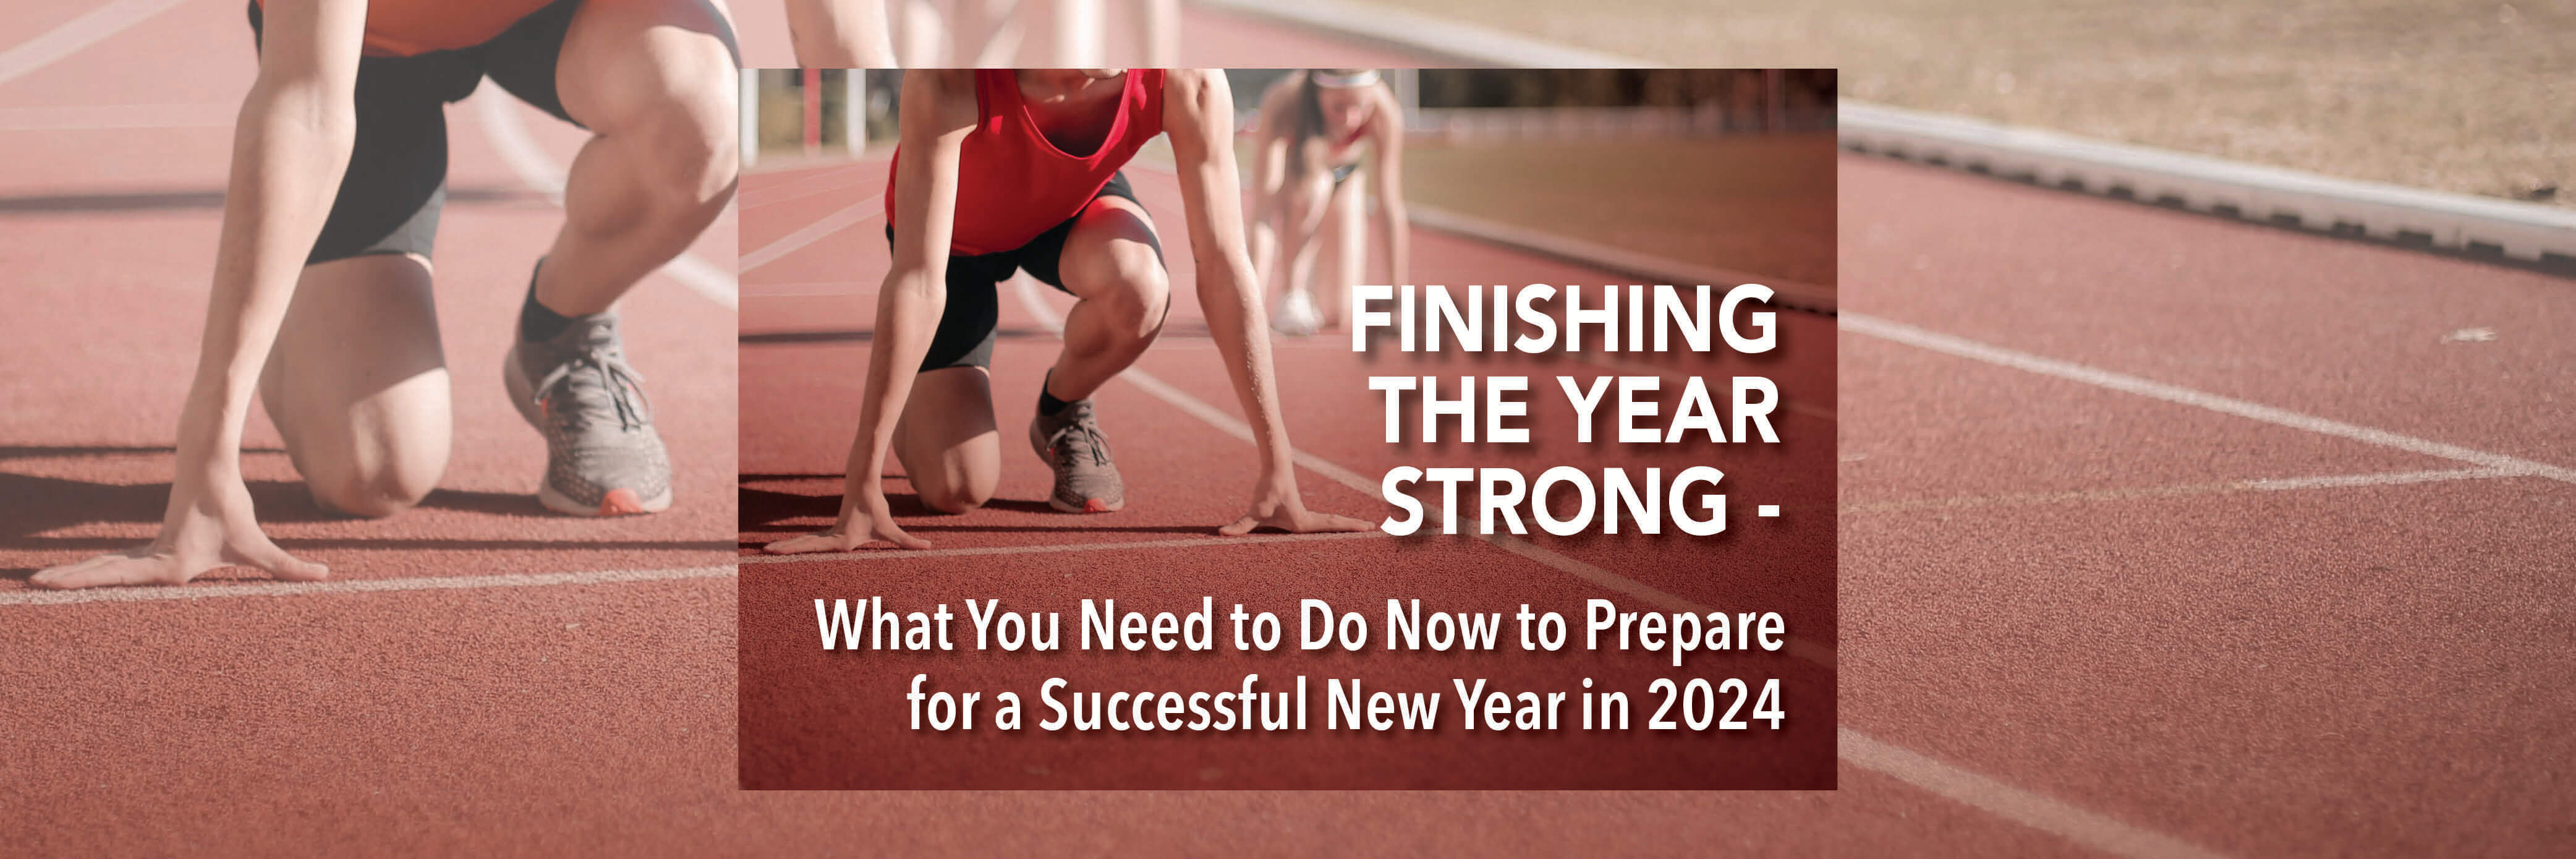 Finishing the Year Strong - What You Need to Do Now to Prepare for a Successful New Year in 2024